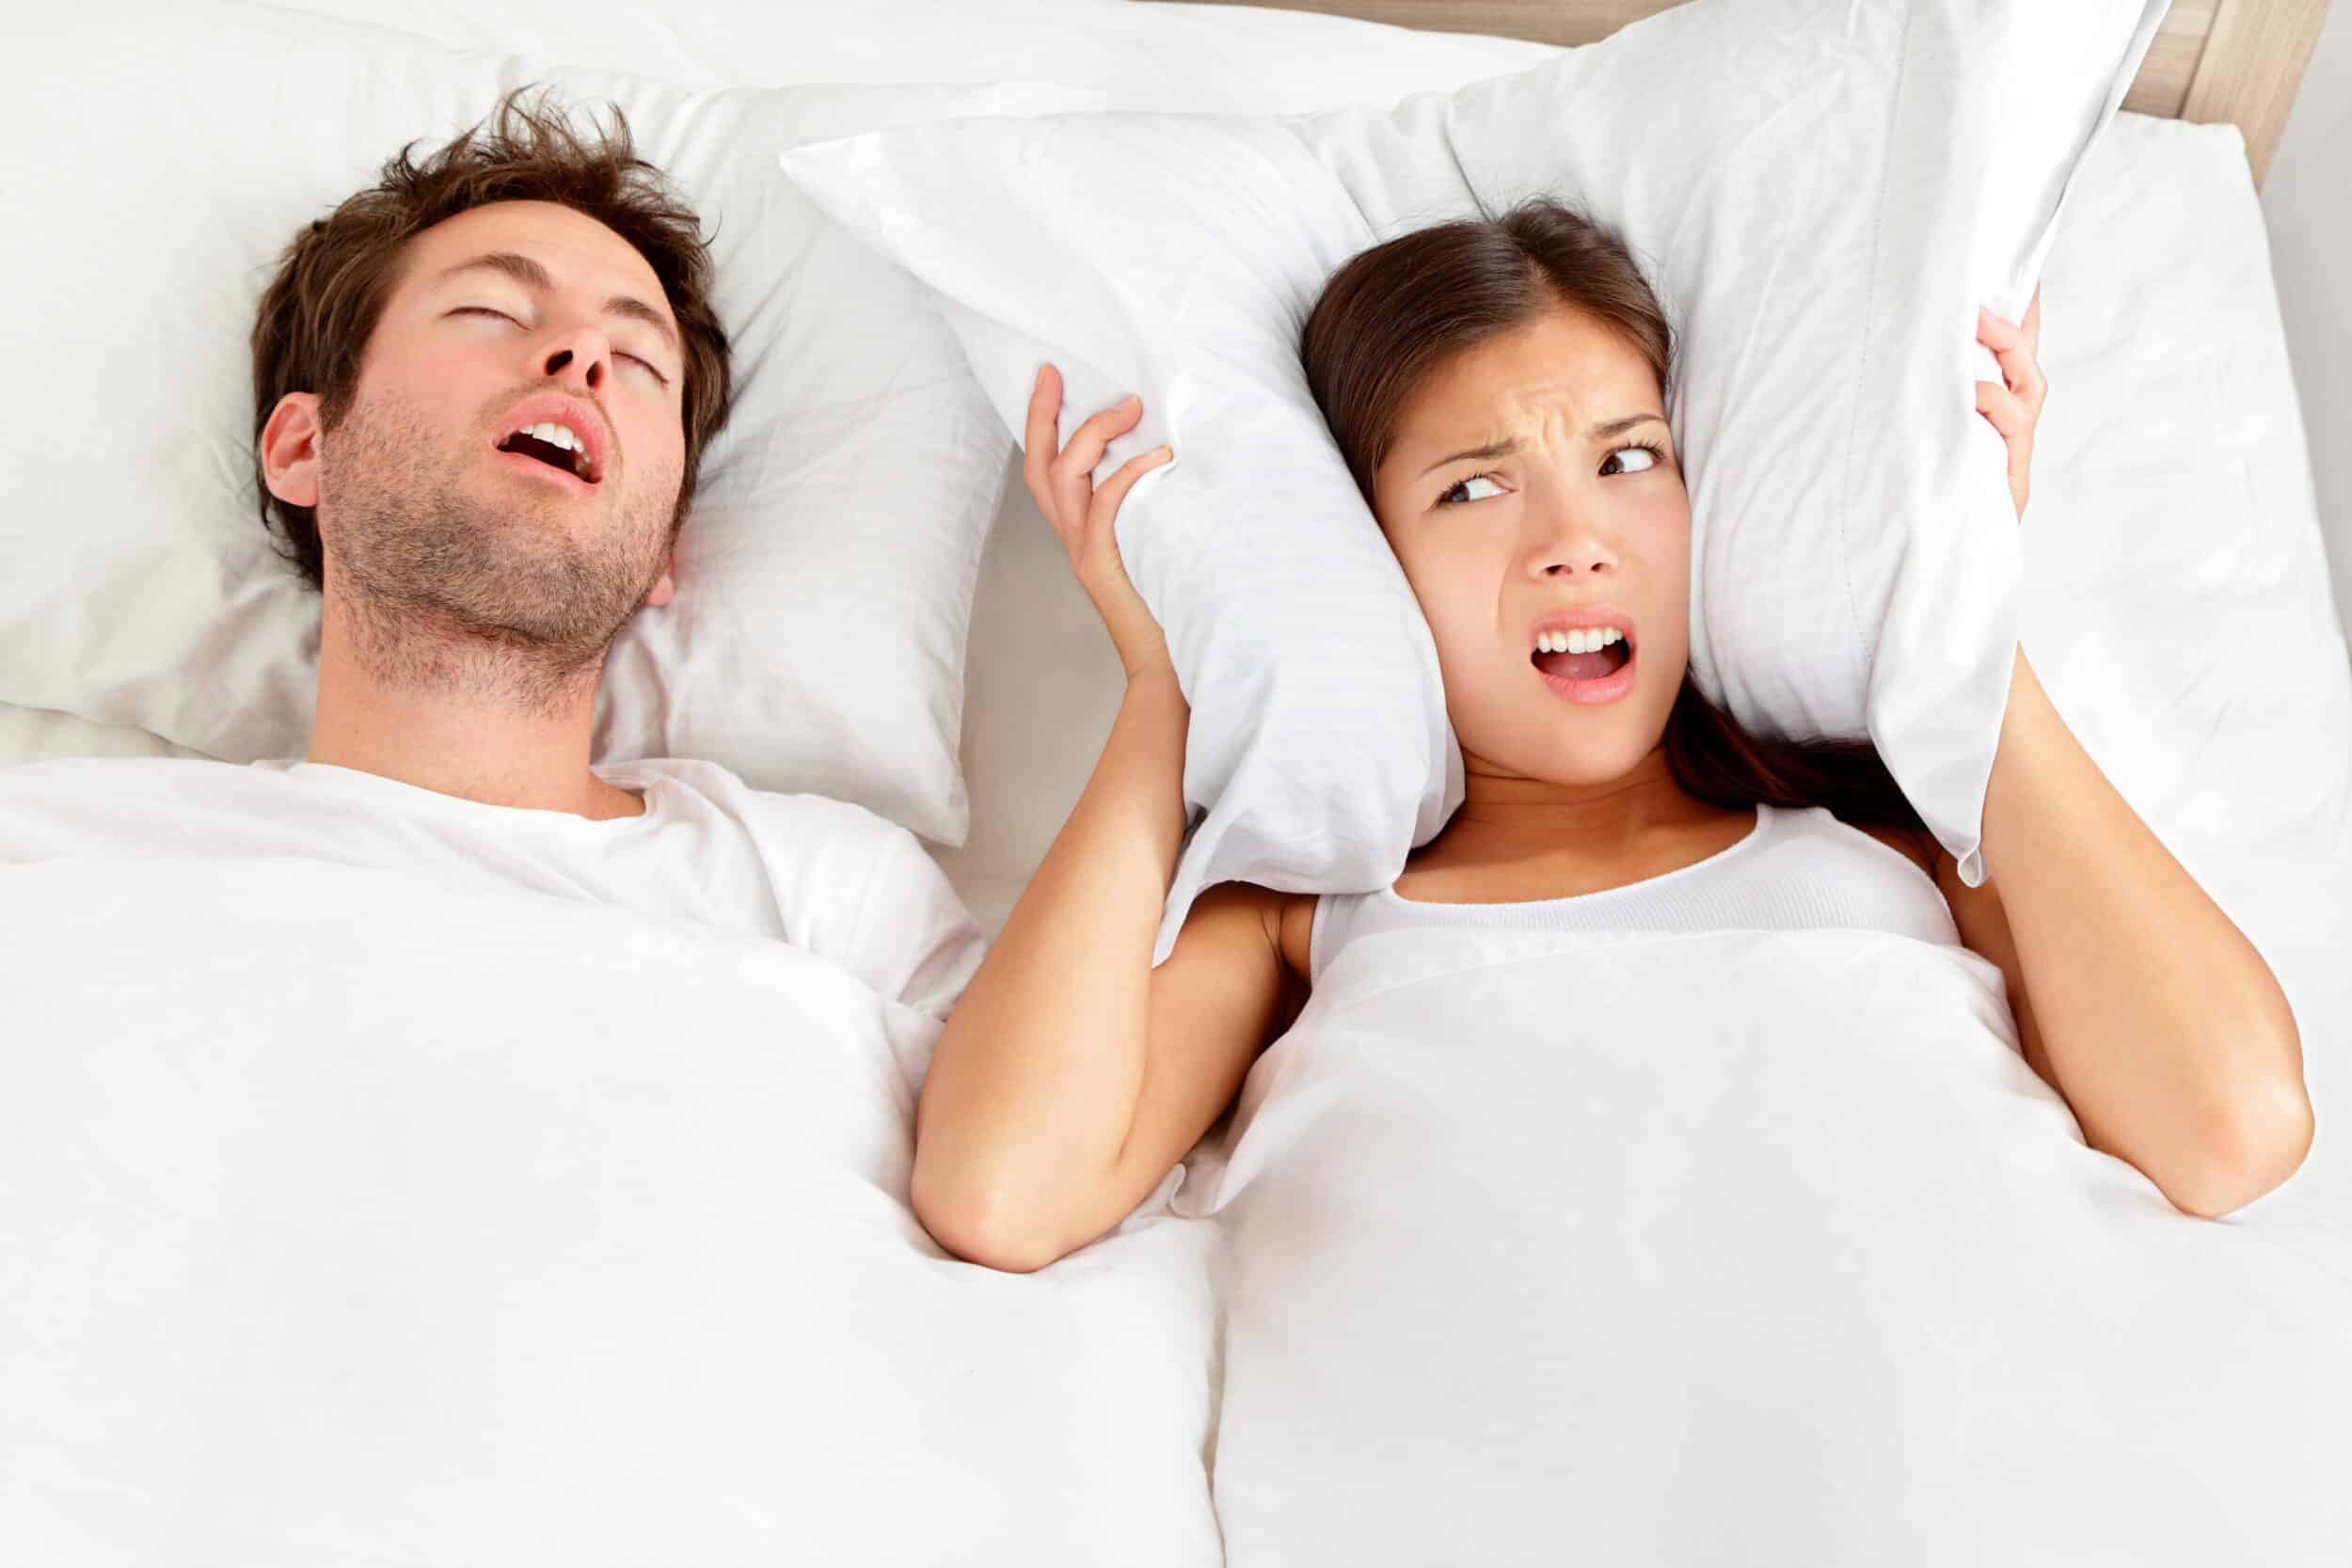 Snoring man wakes up his annoyed wife in Marina Del Rey. This couple needs more restful sleep.